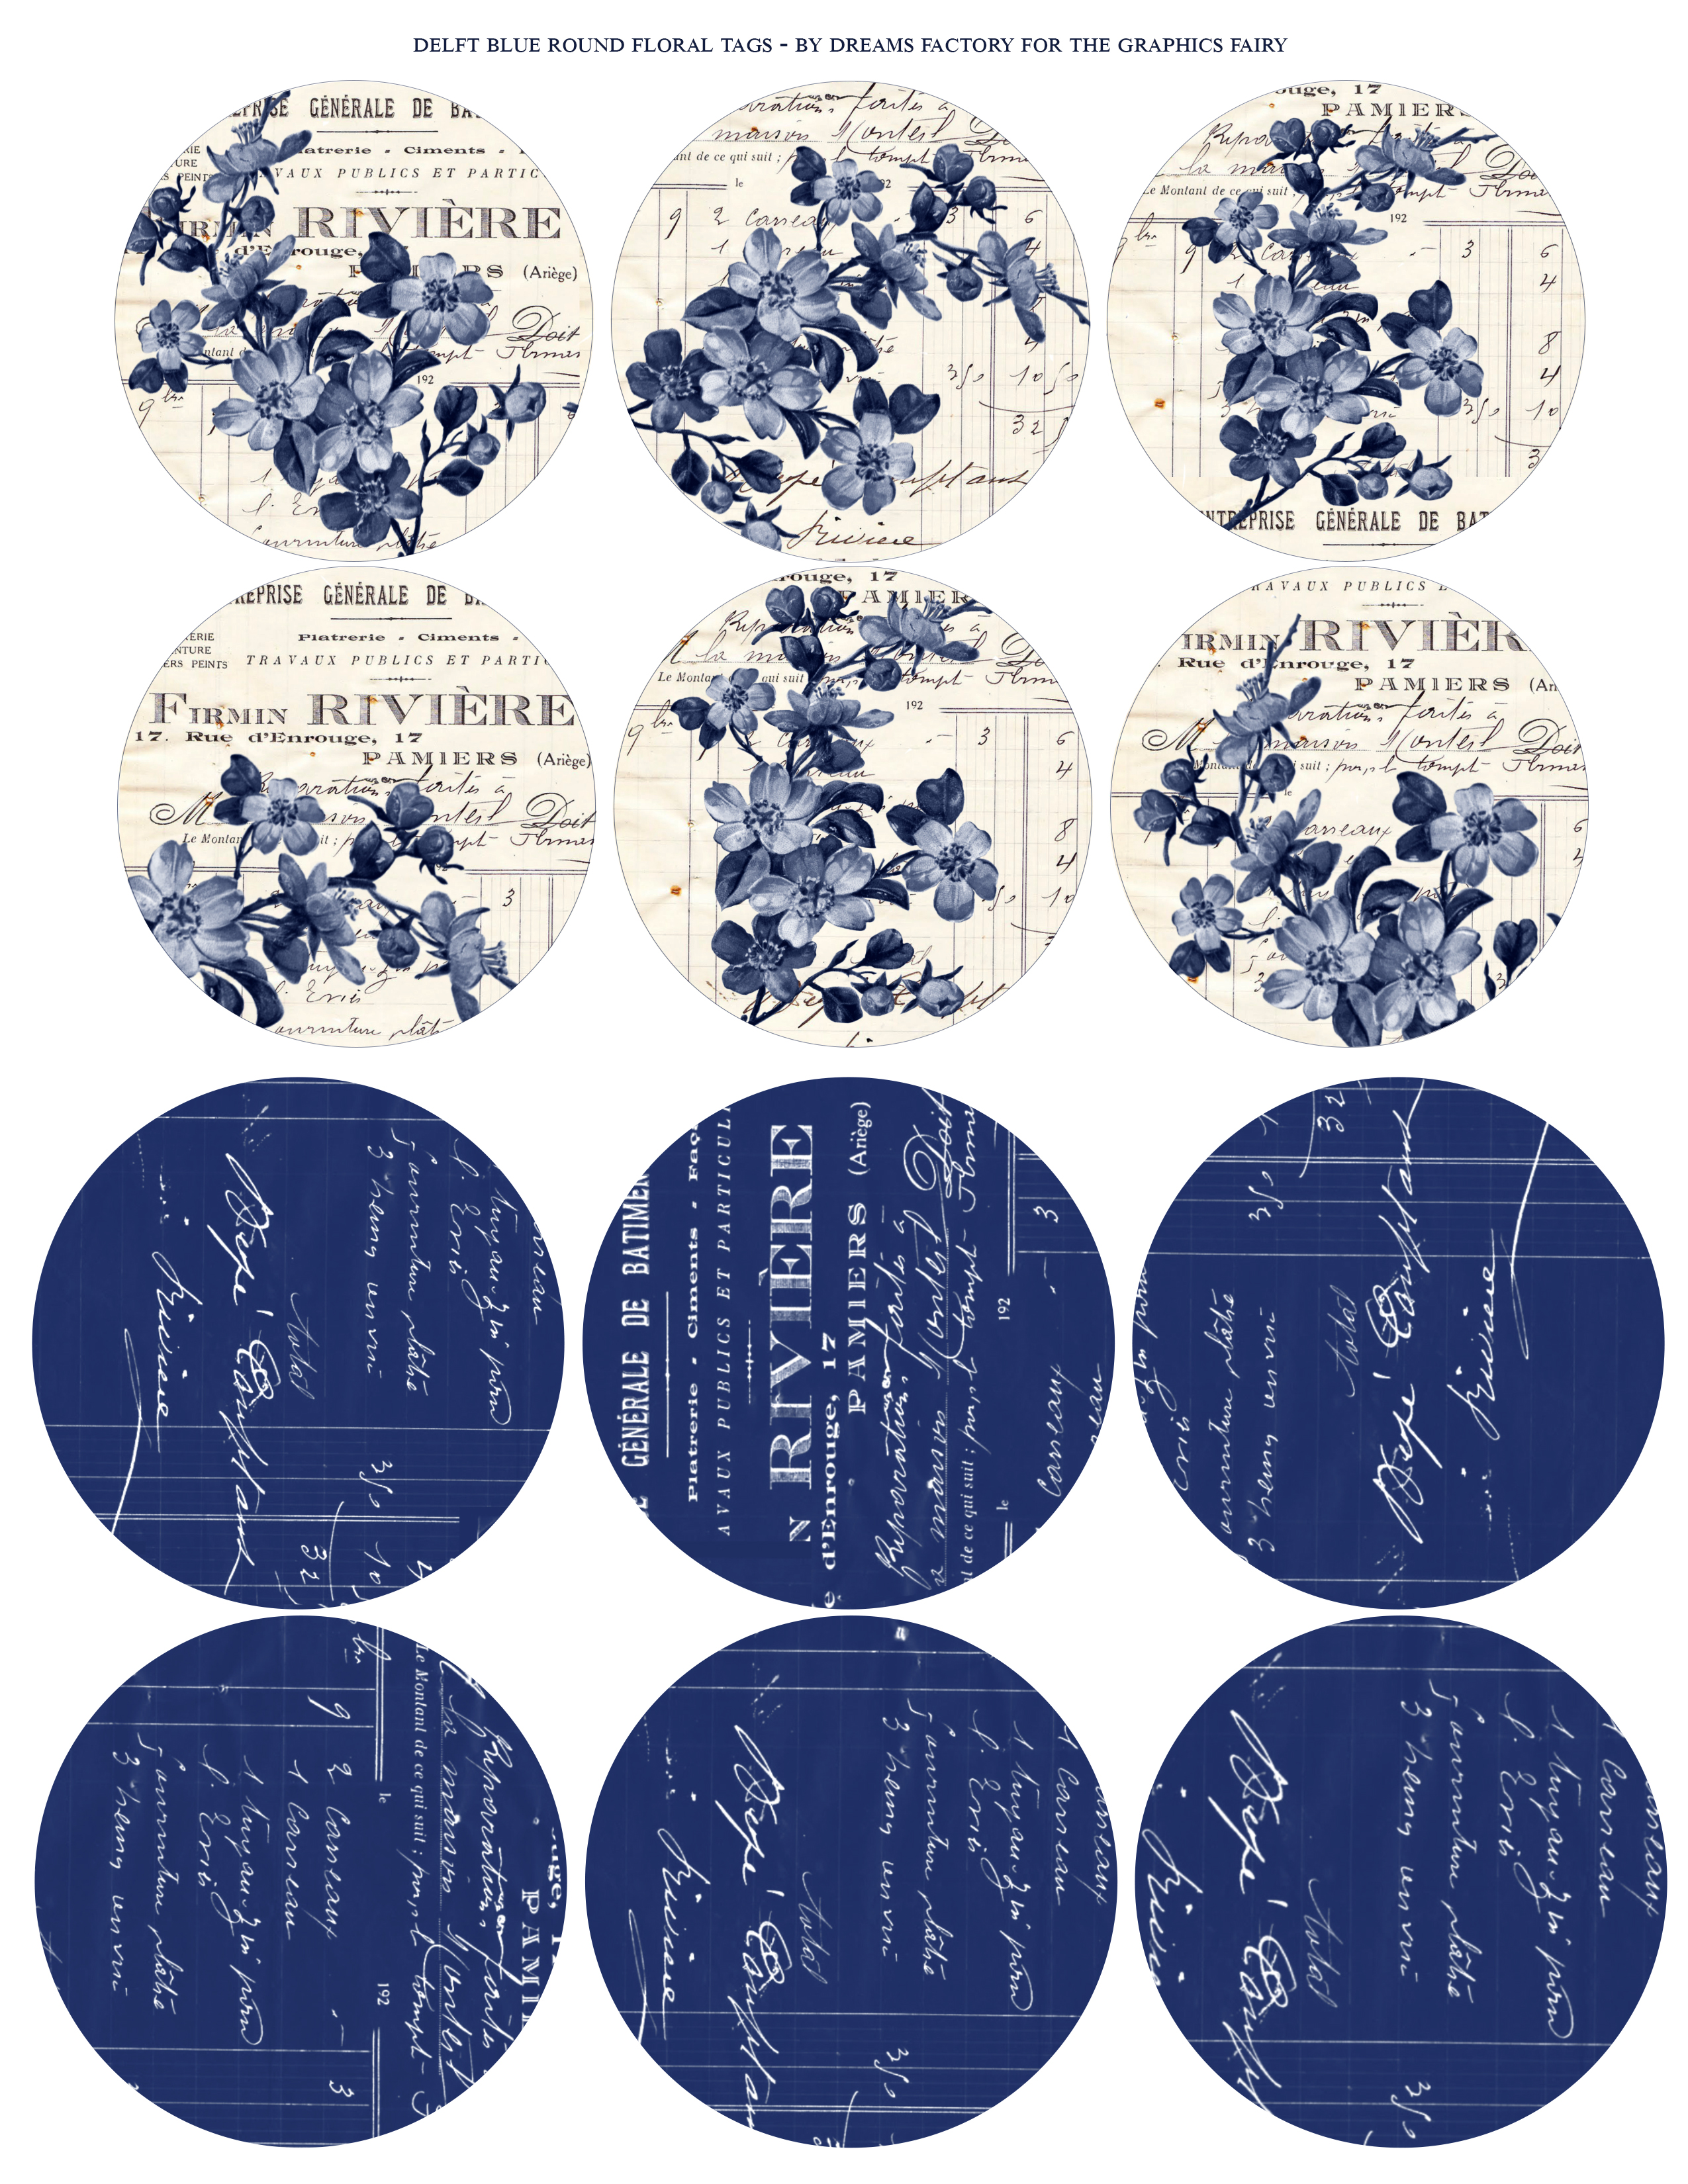 Delft Blue Round Floral Tags printable image